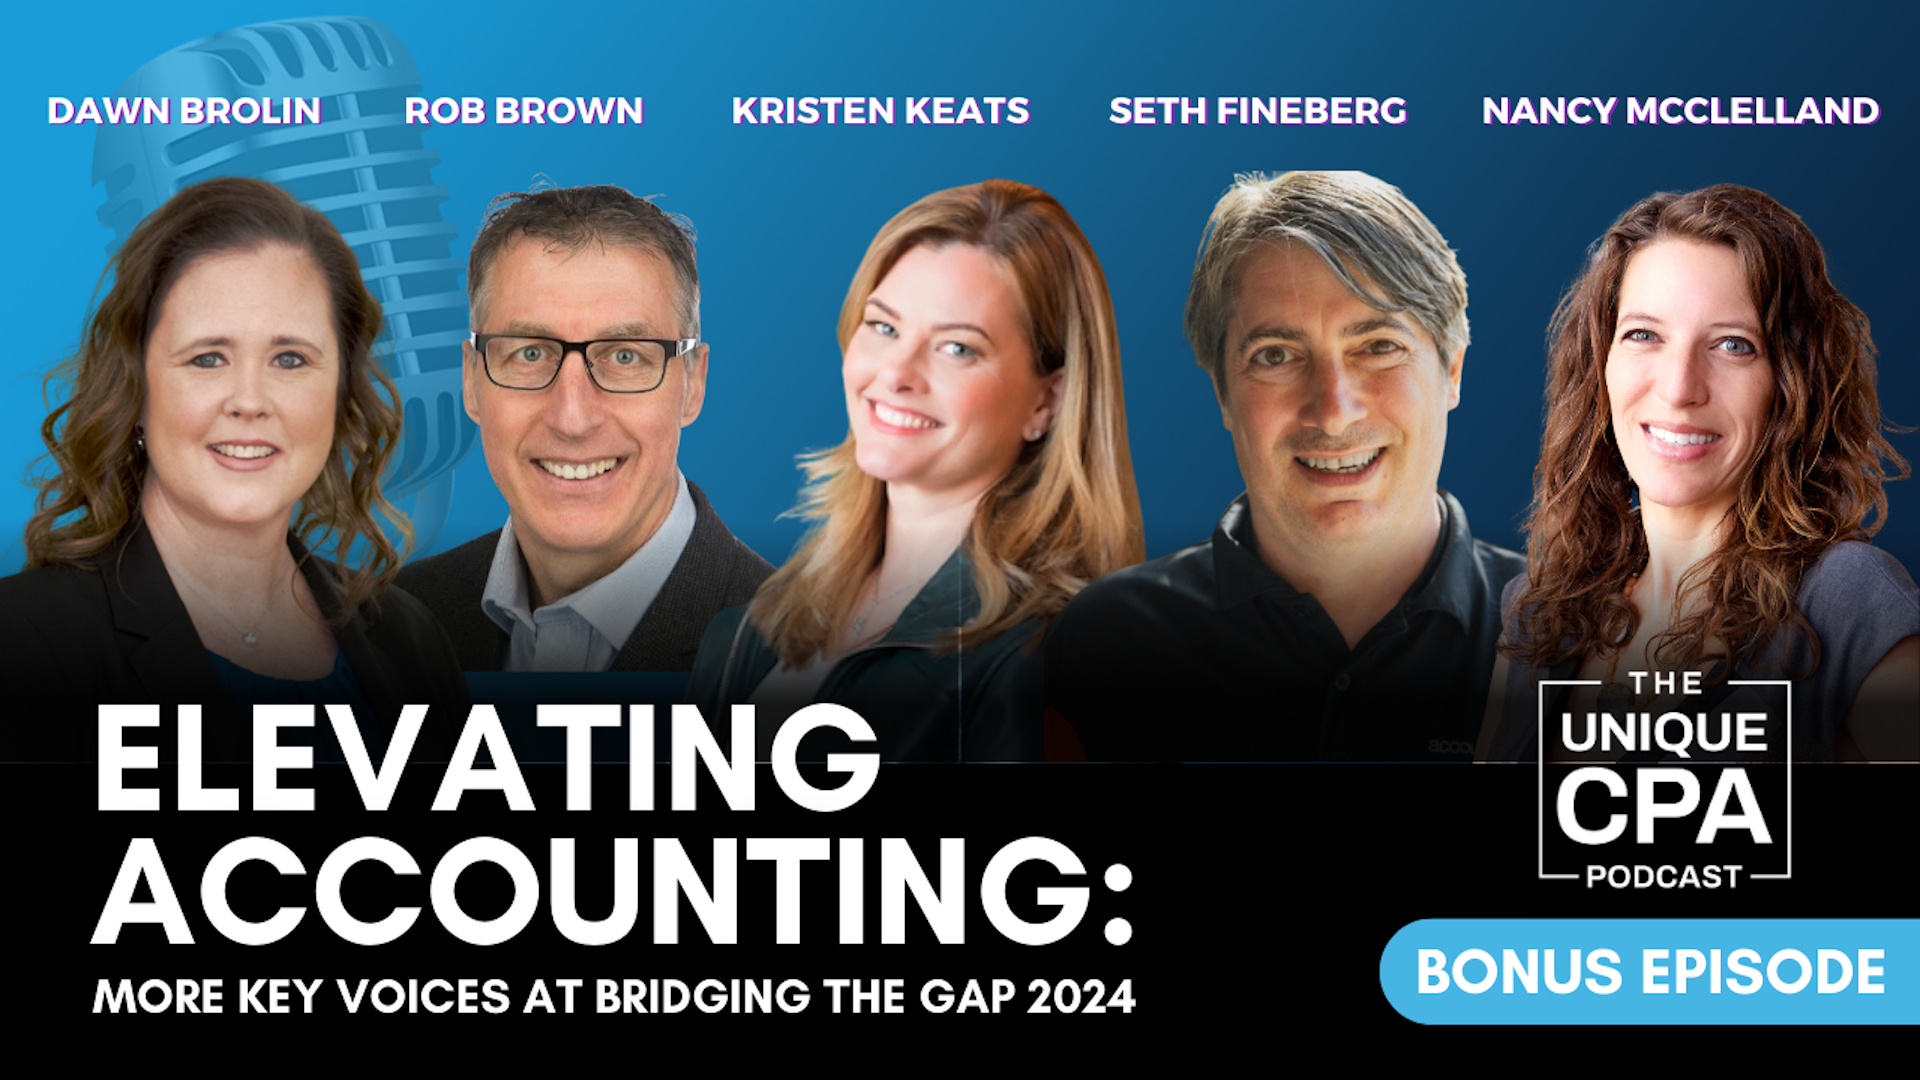 Unique Cpa Featured Image Ep 166 Rob Brown Et Al - Elevating Accounting: More Key Voices At Bridging The Gap 2024 - Tri-Merit